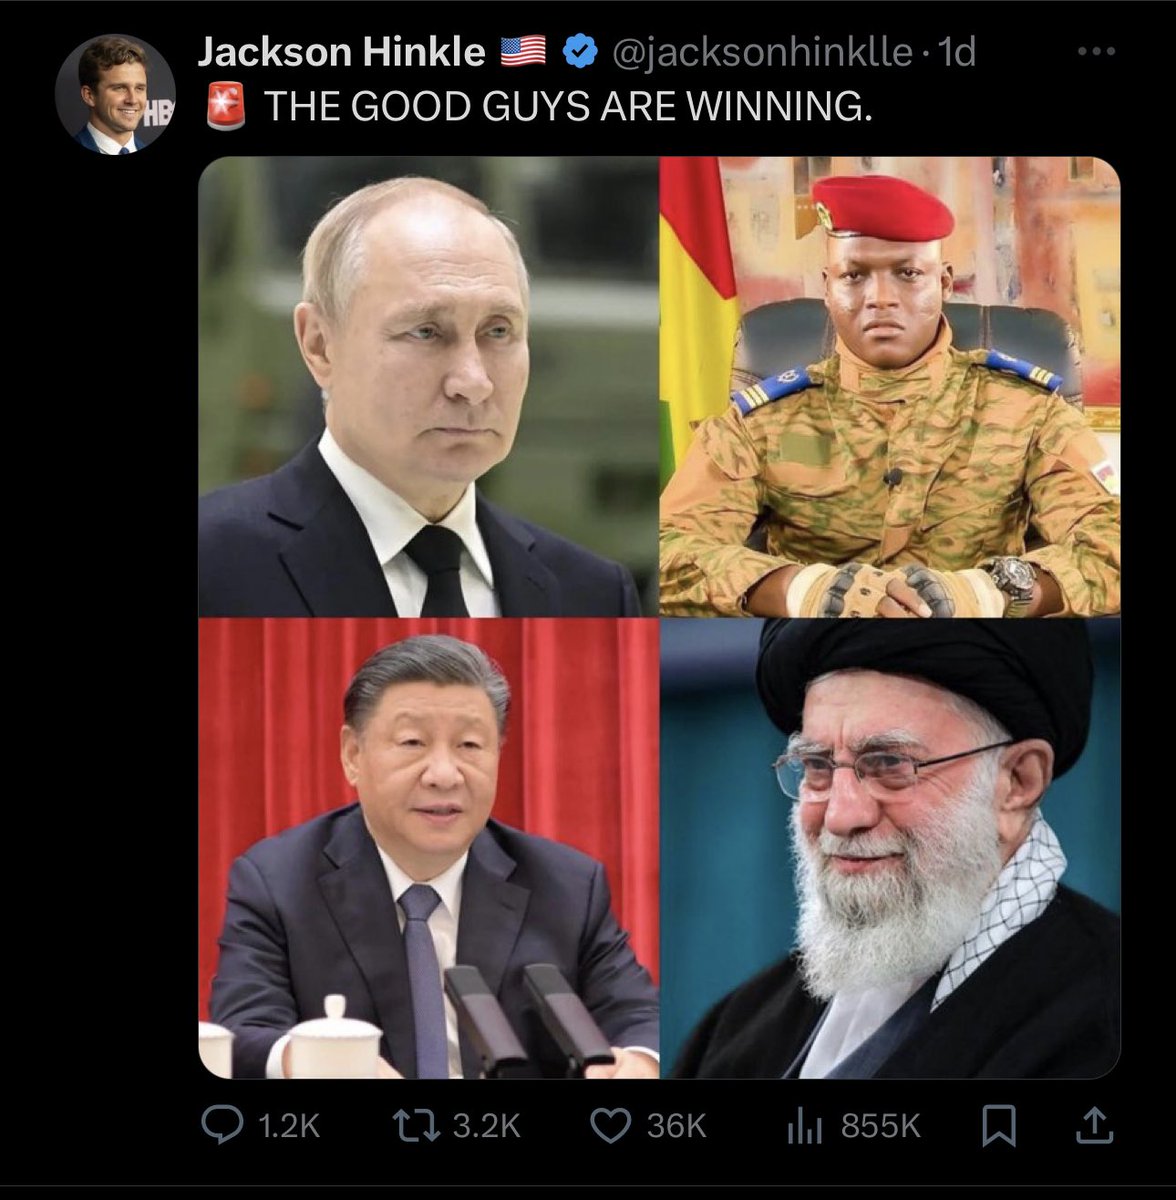 Jackson Hinkle’s posts are so dangerous and false he gets community noted on a daily basis, multiple times per post. He openly supports terrorists and enemies of the USA. But NYTimes just did a whole piece on him, legitimizing his virulent and dangerous platform.…